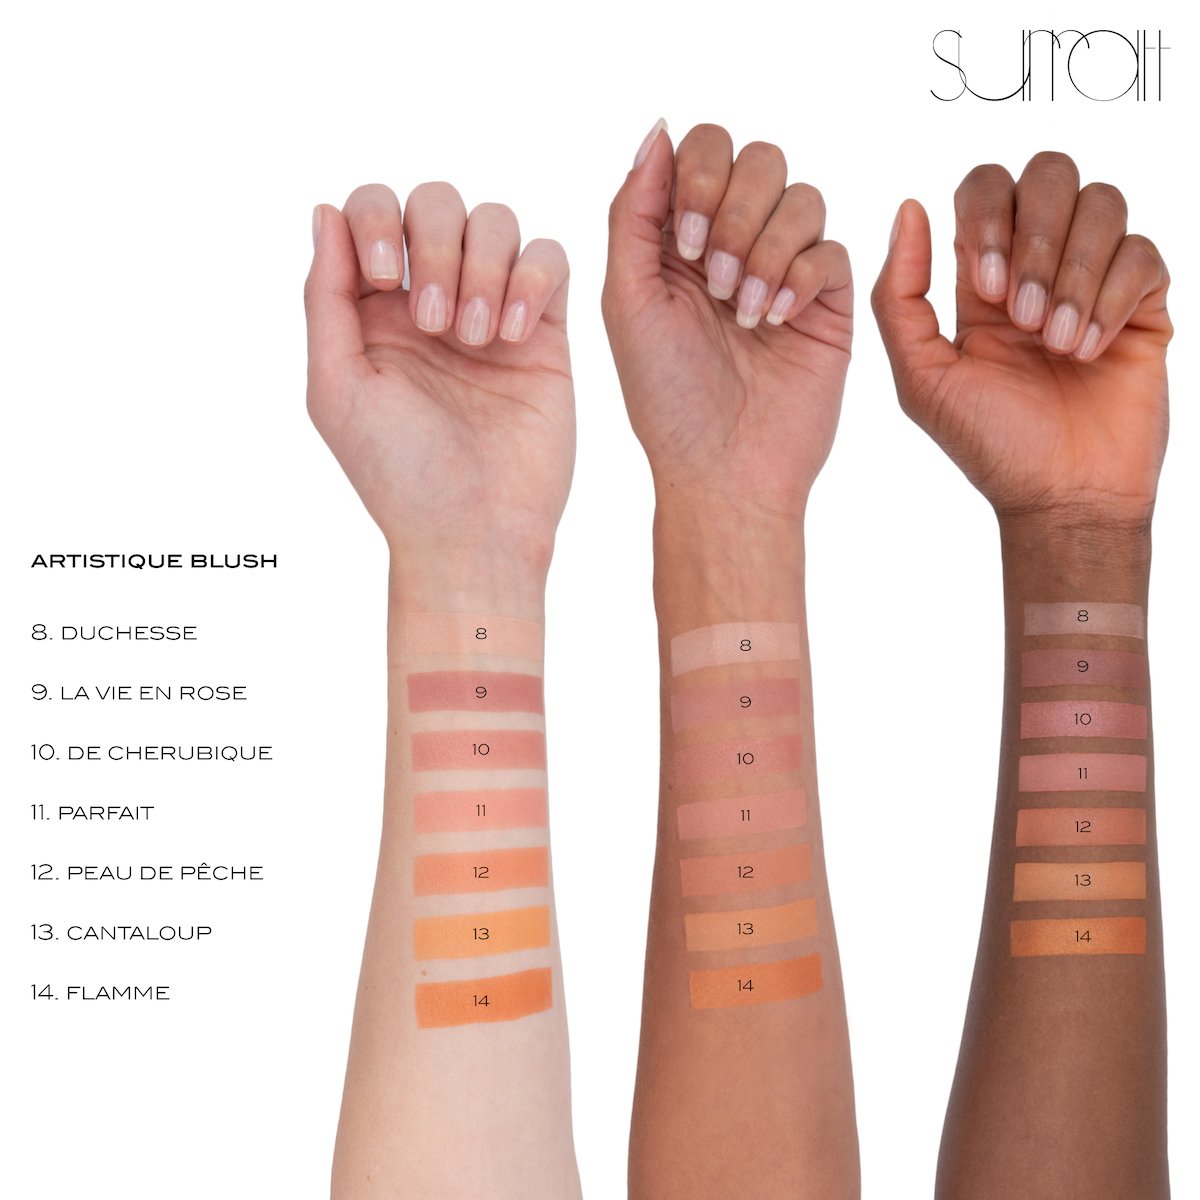 ALLVAR - powder blush, highlight and contour swatches on various skin tones shades 2